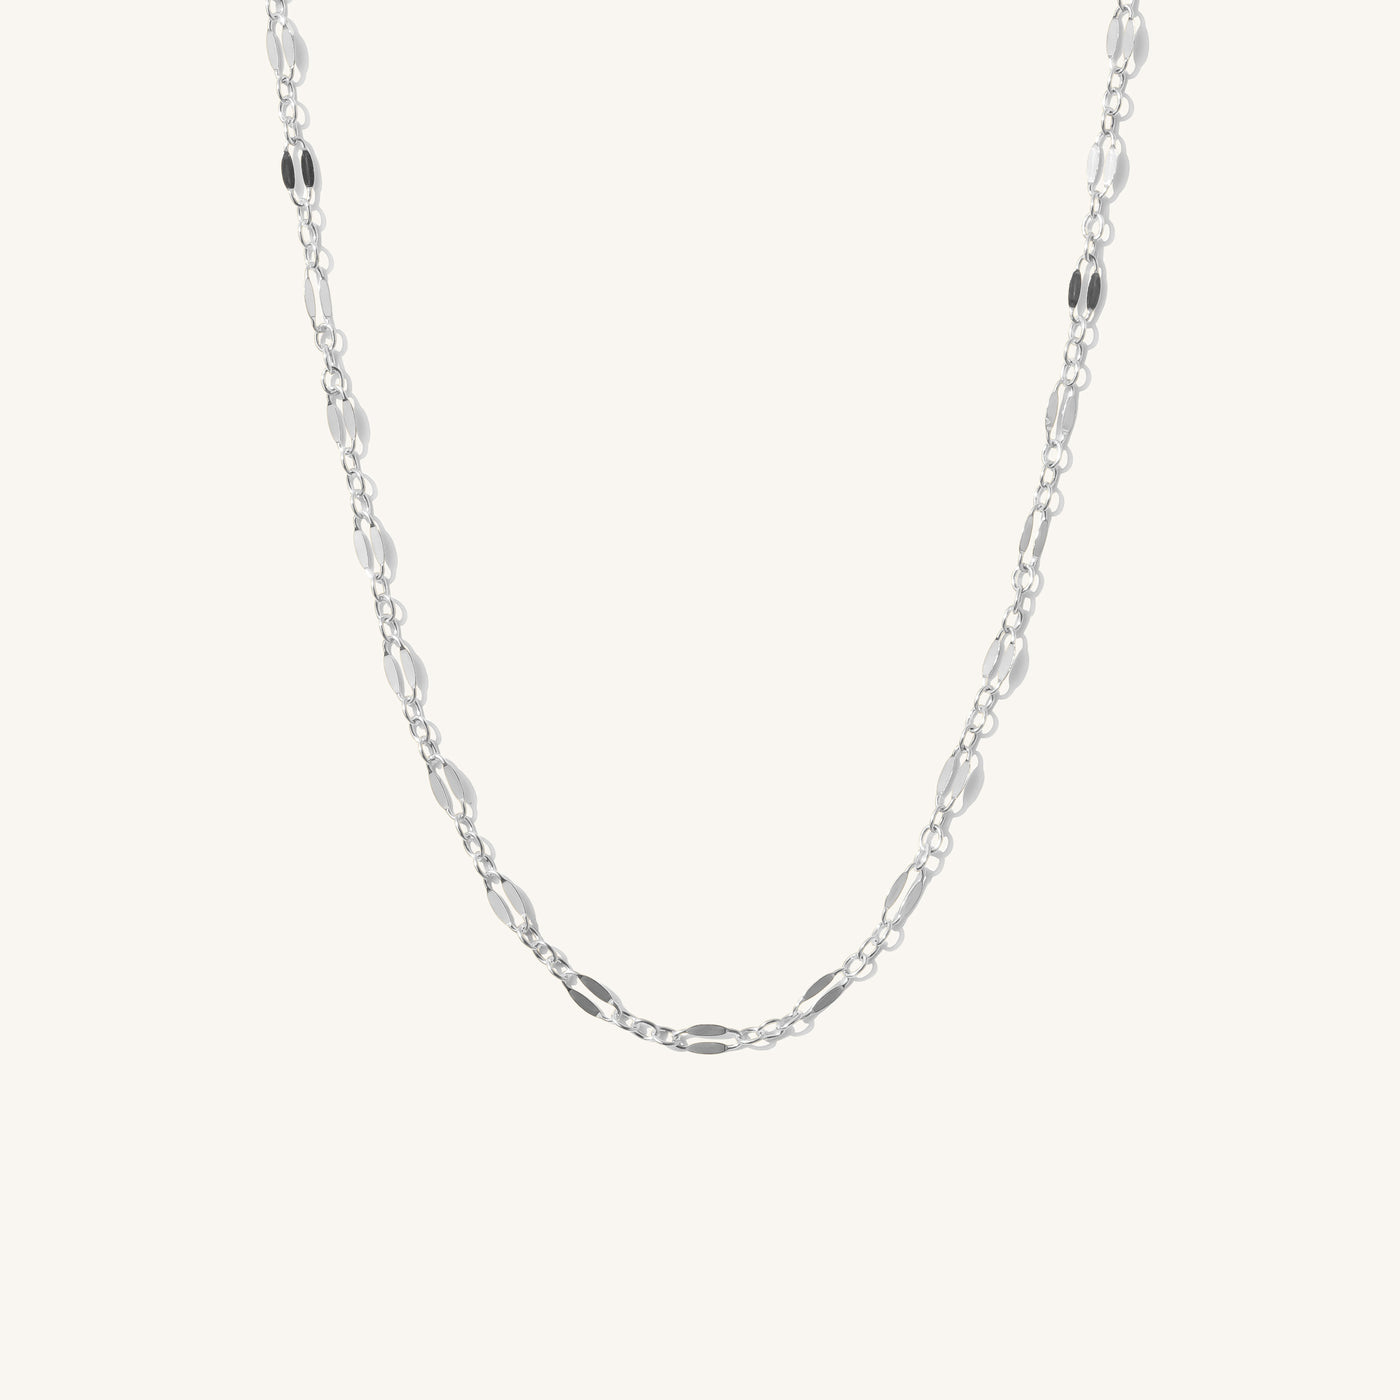 Dainty Lace Chain Necklace | Simple & Dainty Jewelry